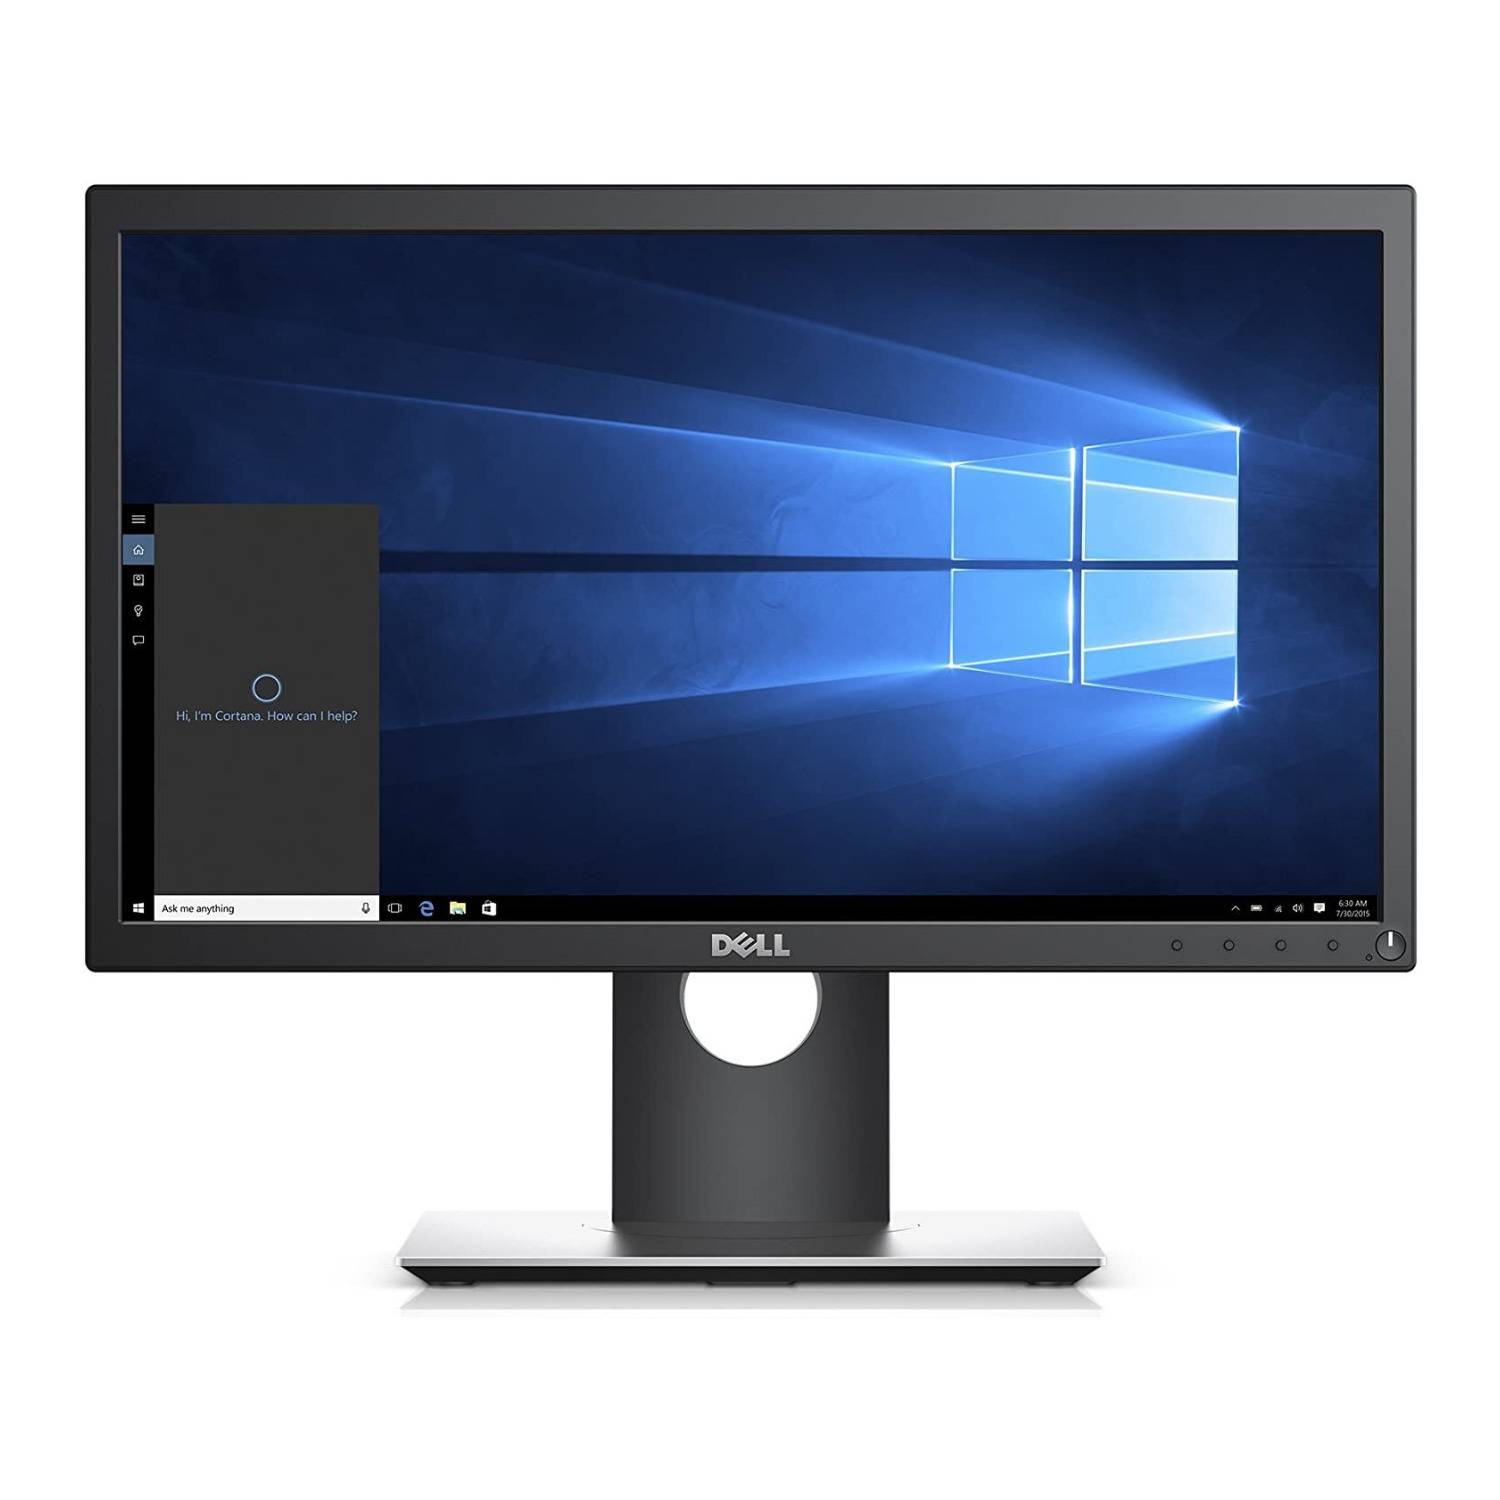 Dell P2217H 21.5-Inch Full HD IPS LED-Backlit Display with DP, HDM, VGA and USB Ports